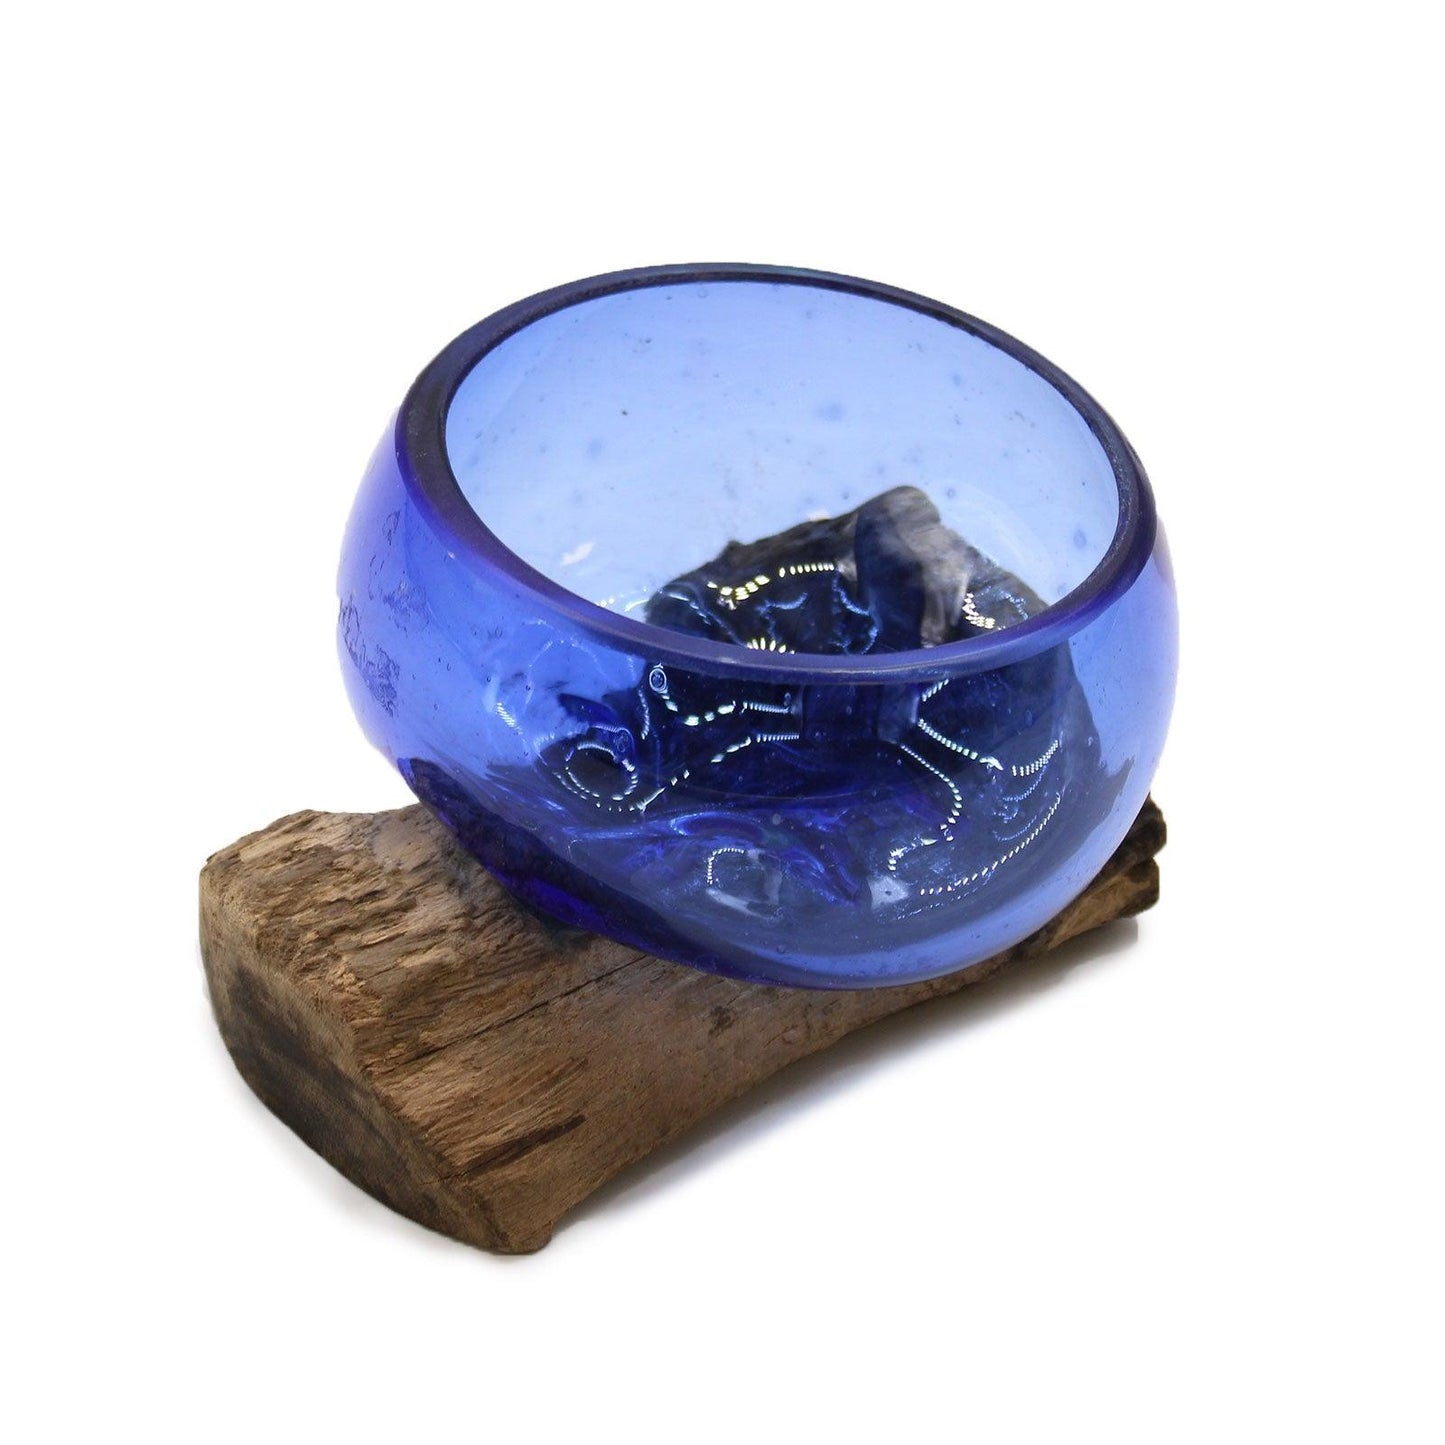 Molton Glass Mini Blue Bowl on Wood - DuvetDay.co.uk